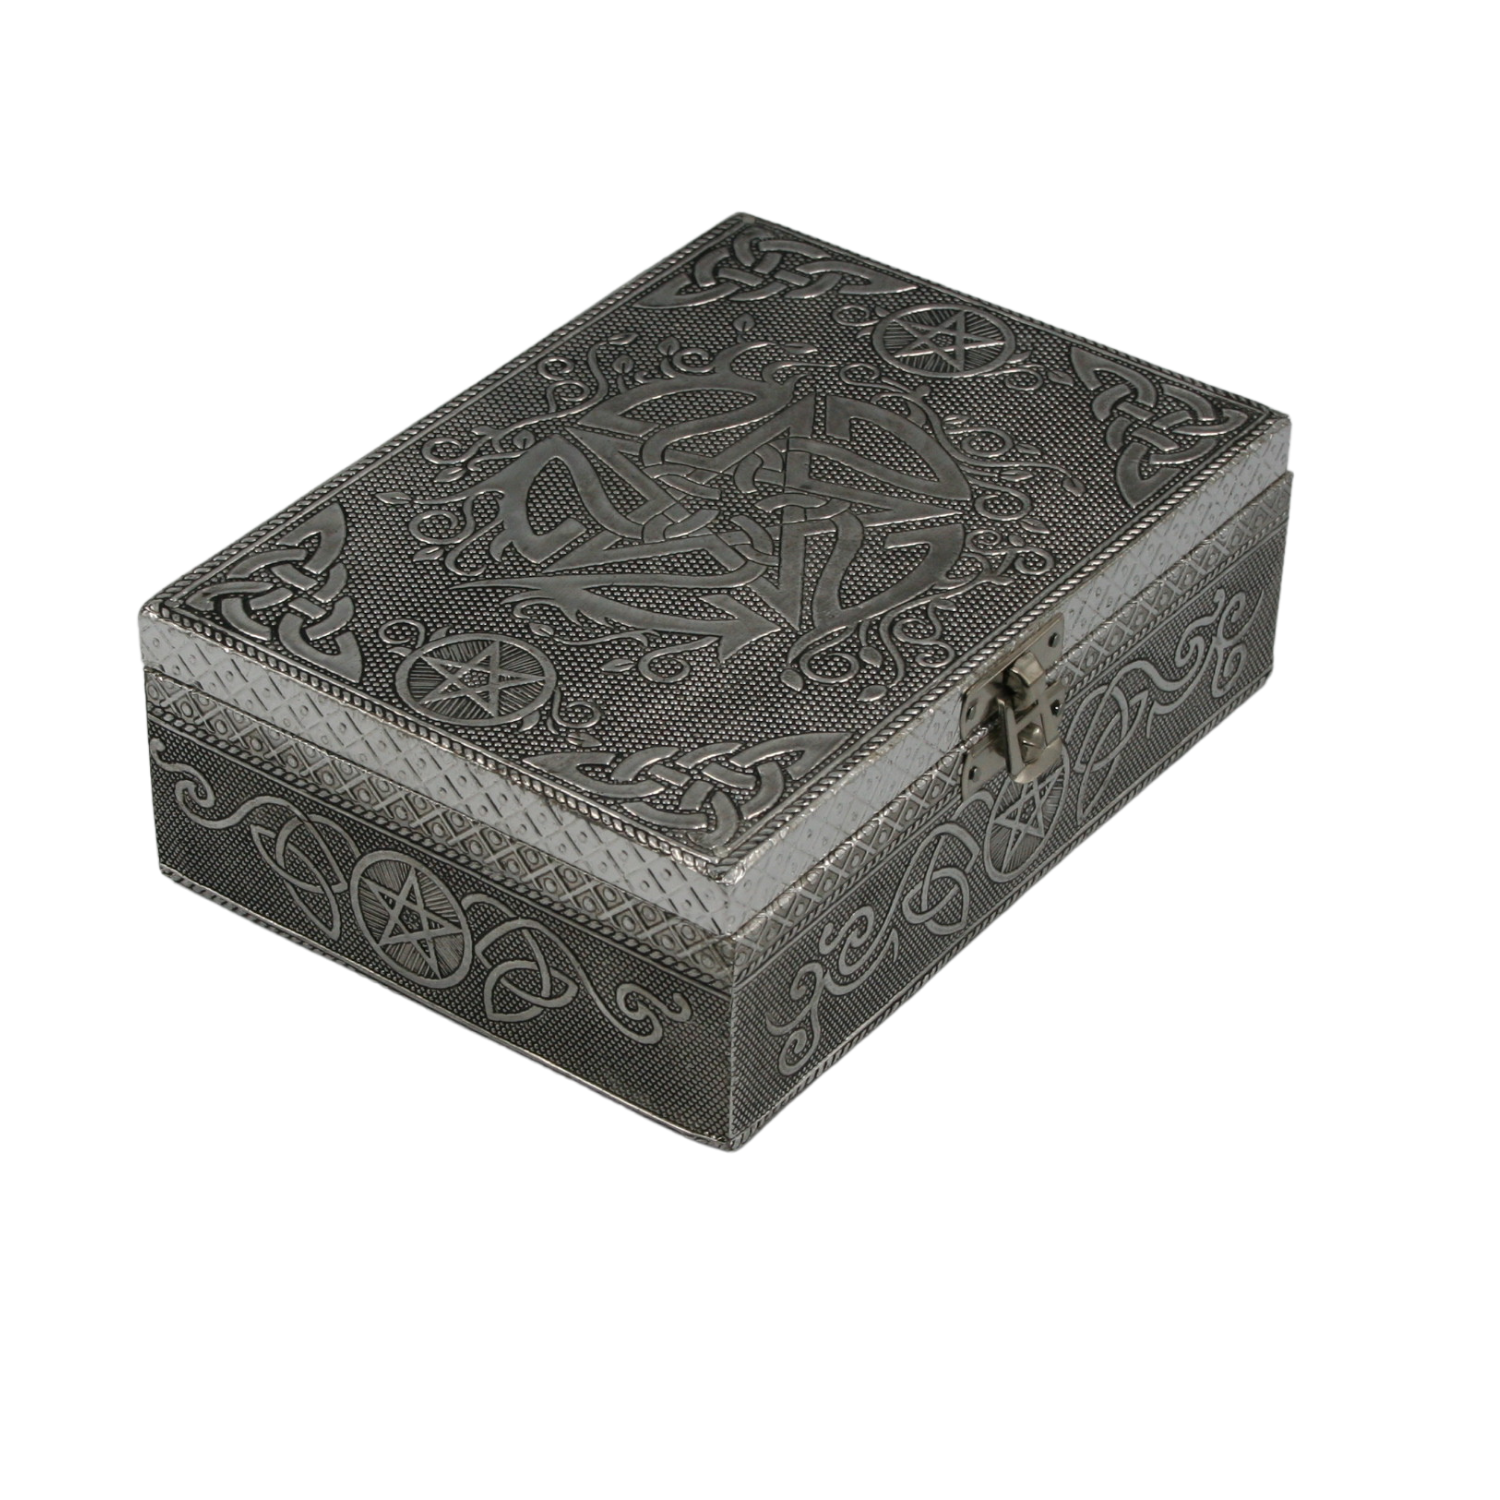 Pentagram Carved Metal over Wood 4.75 x 6.75" Box with latch